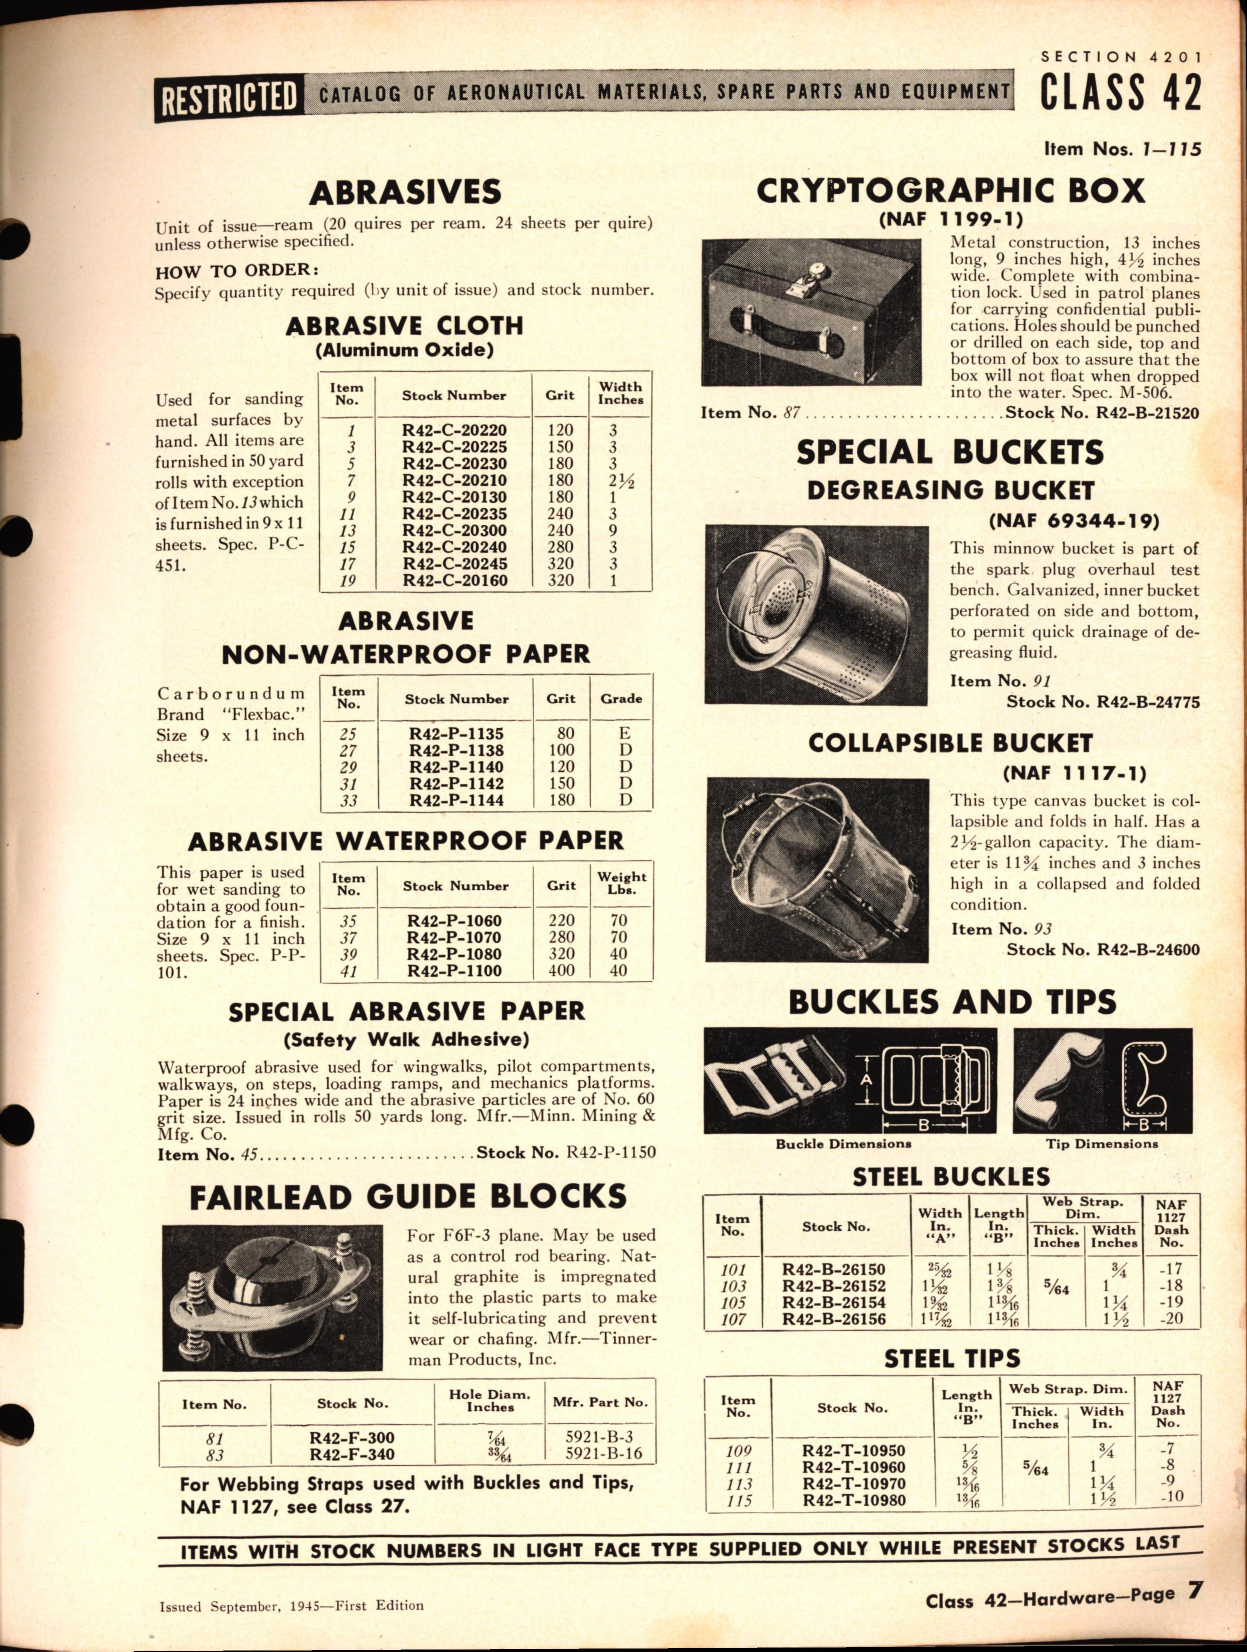 Sample page 7 from AirCorps Library document: Hardware